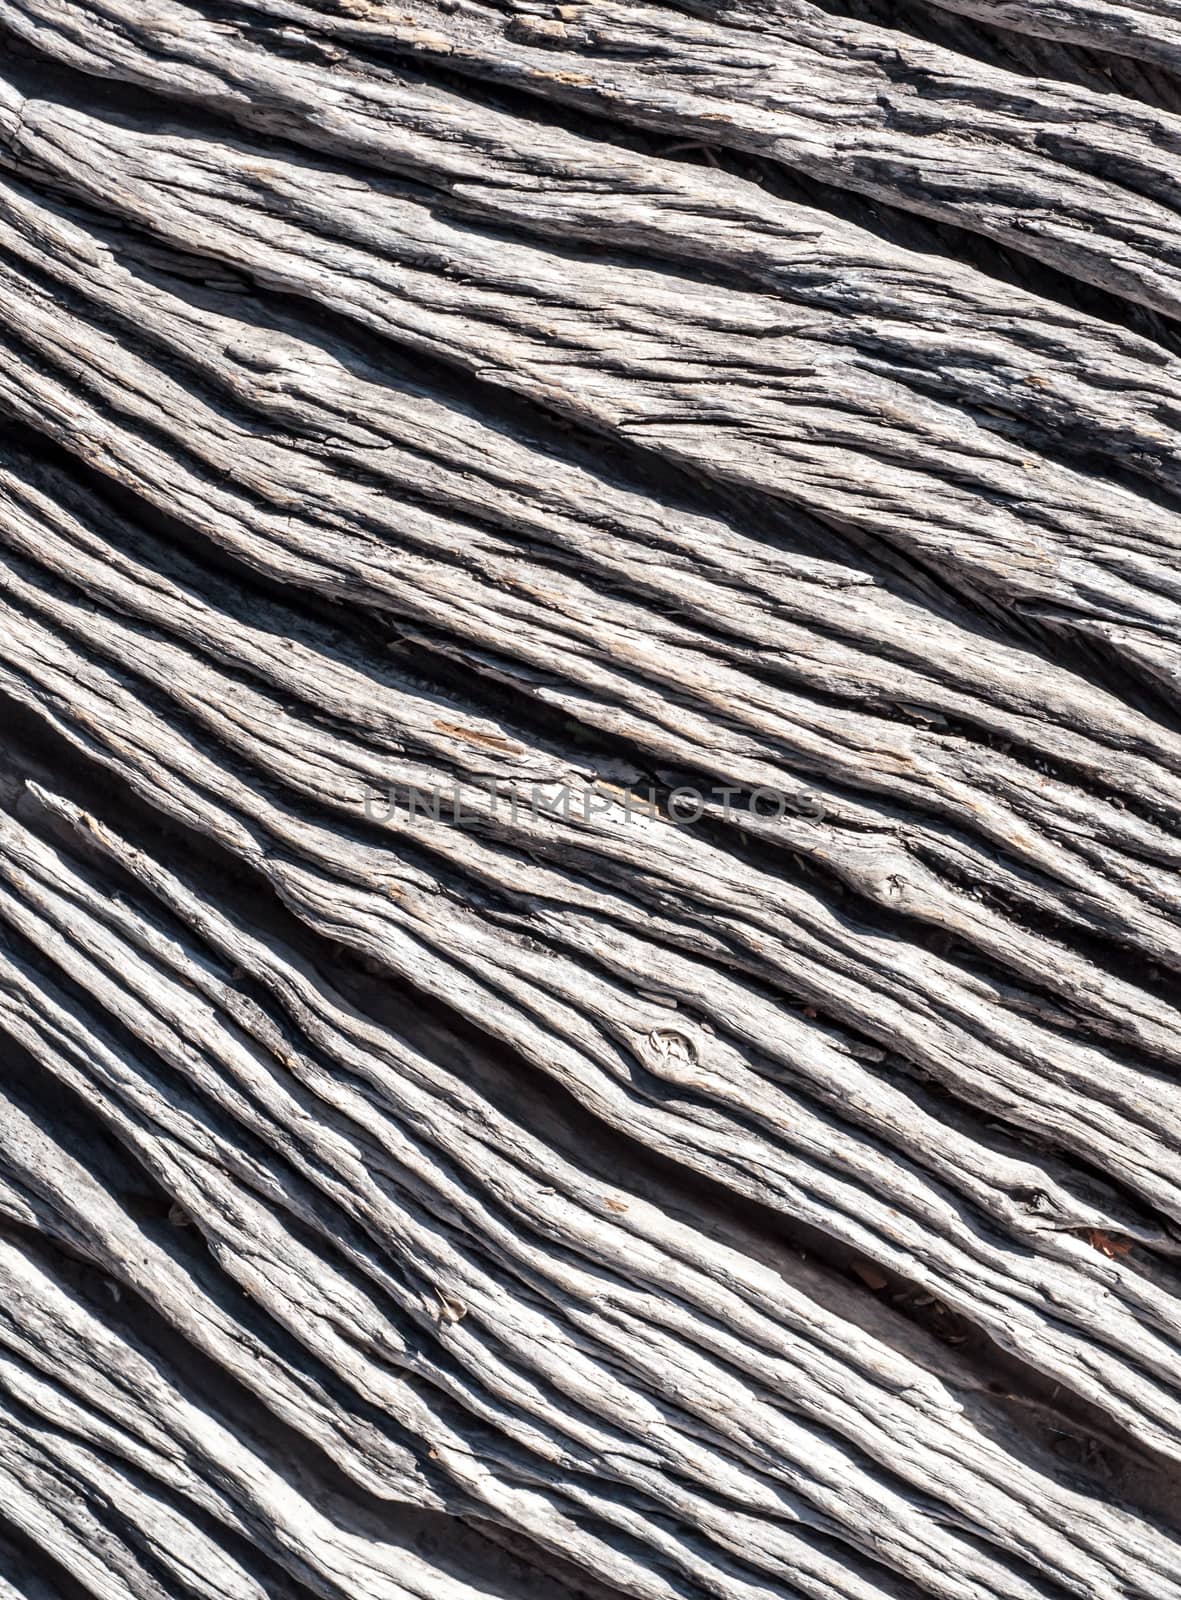 up close image of a leadwood tree showing texture.